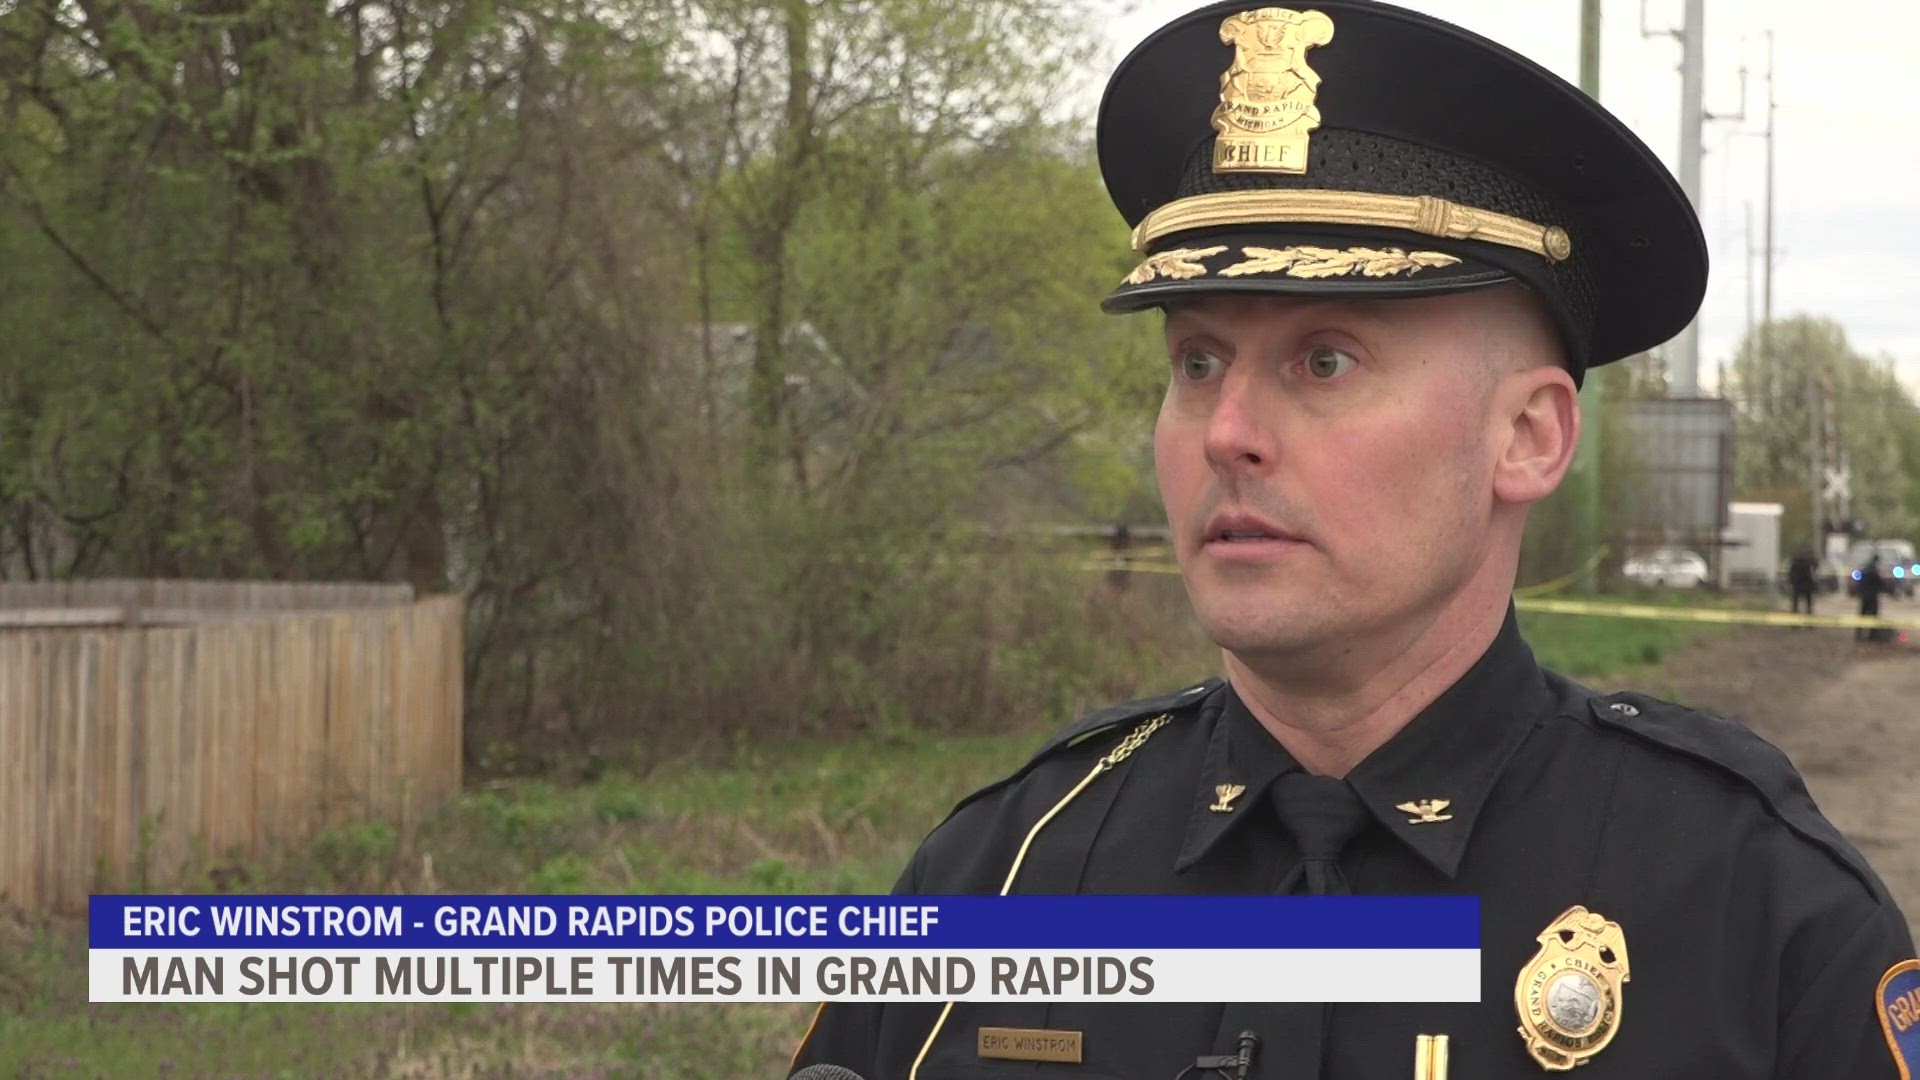 GRPD Chief Eric Winstrom said the investigation is early but so far they know the man was shot multiple times with a handgun on the railroad tracks.